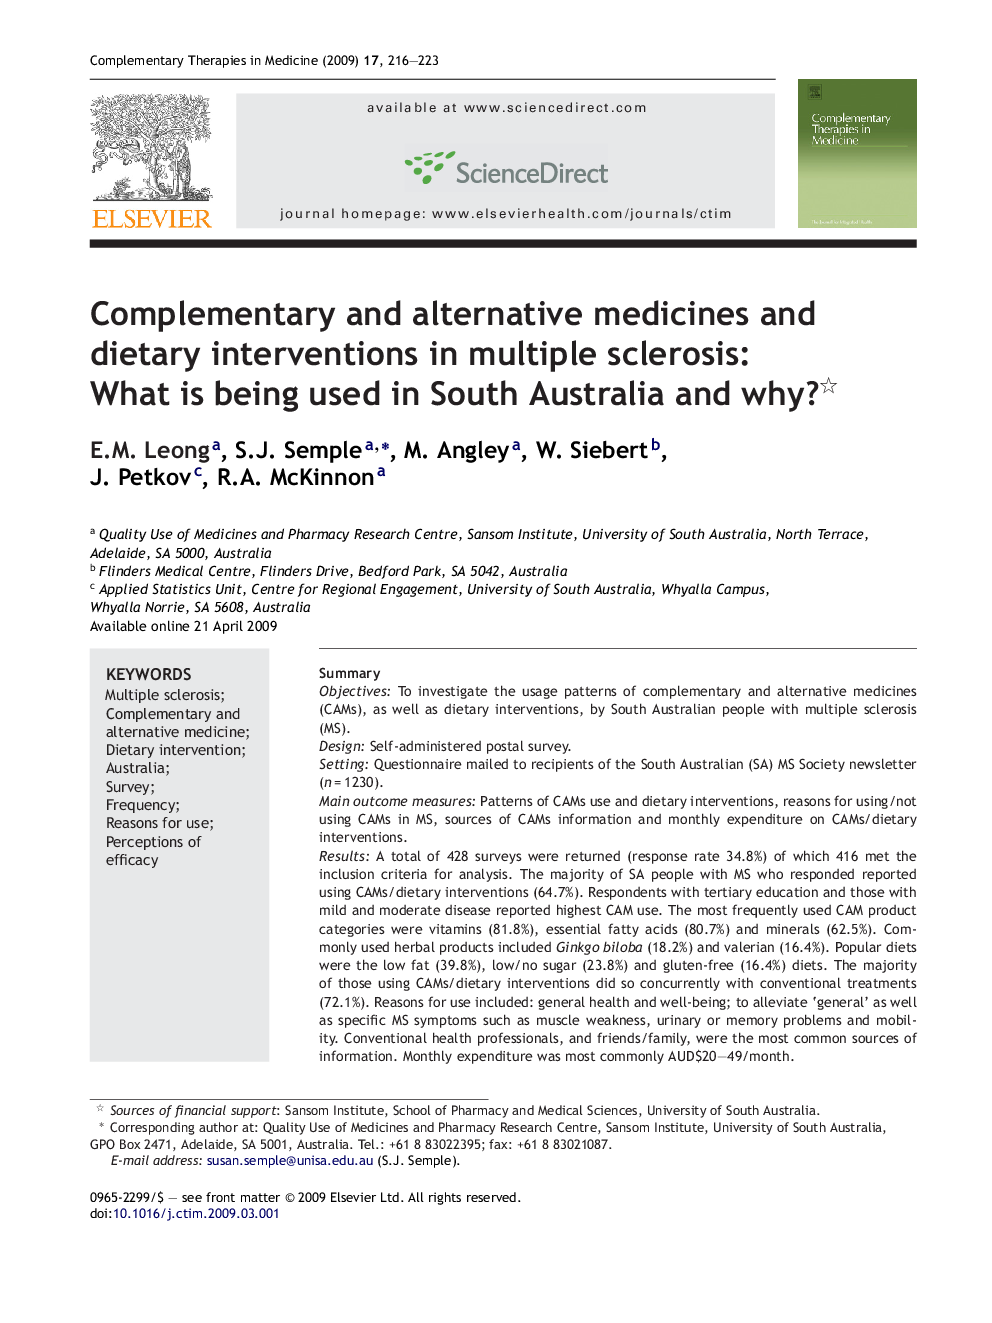 Complementary and alternative medicines and dietary interventions in multiple sclerosis: What is being used in South Australia and why? 